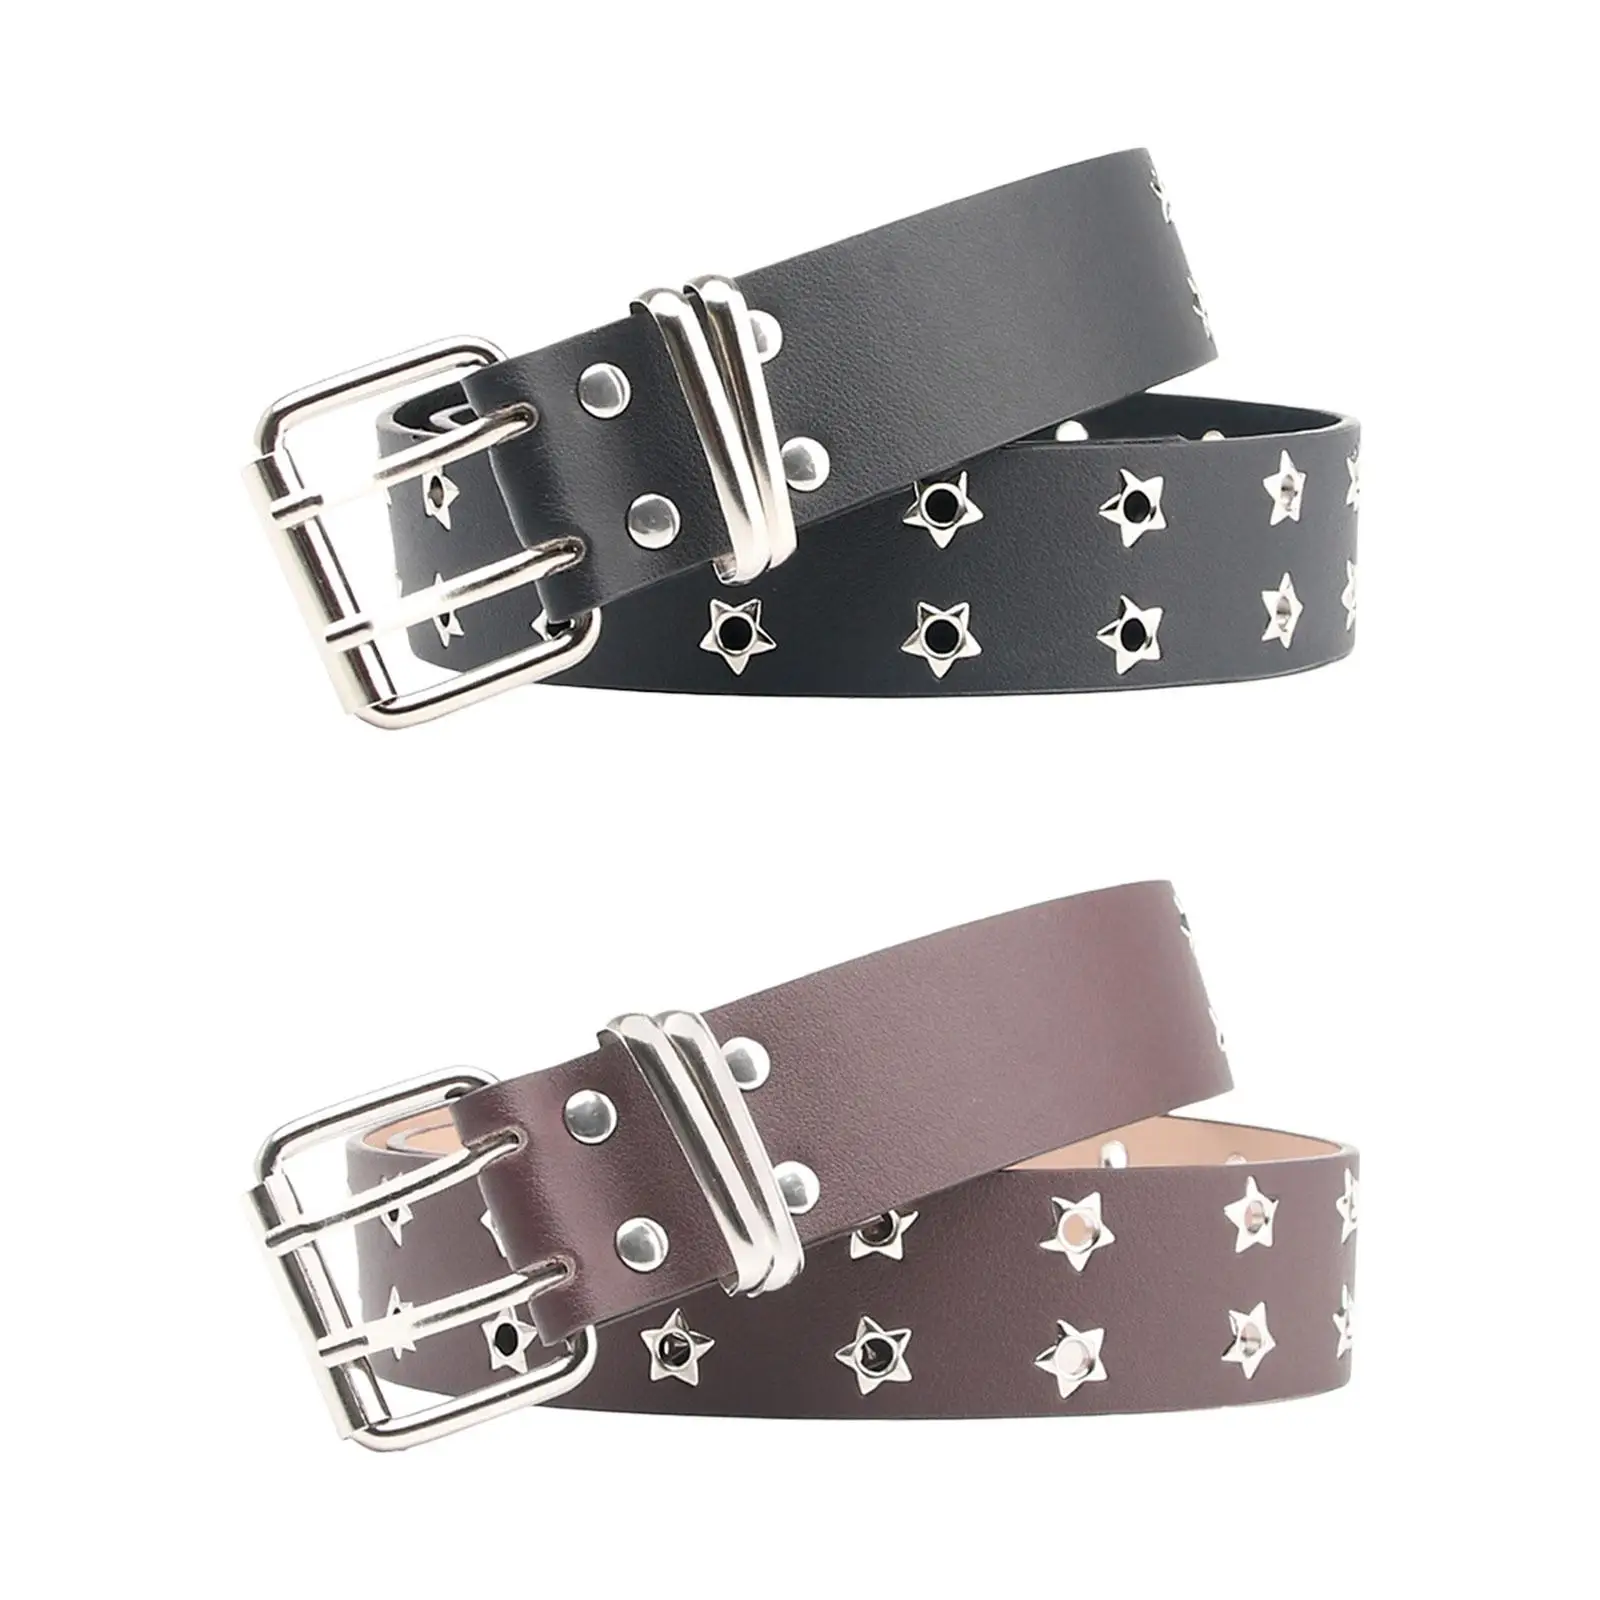 Double Grommet Belt Double Prong Buckle Gothic Adjustable Punk PU Leather with 2 Holes Punk Belt for Club Cosplay Jeans Party